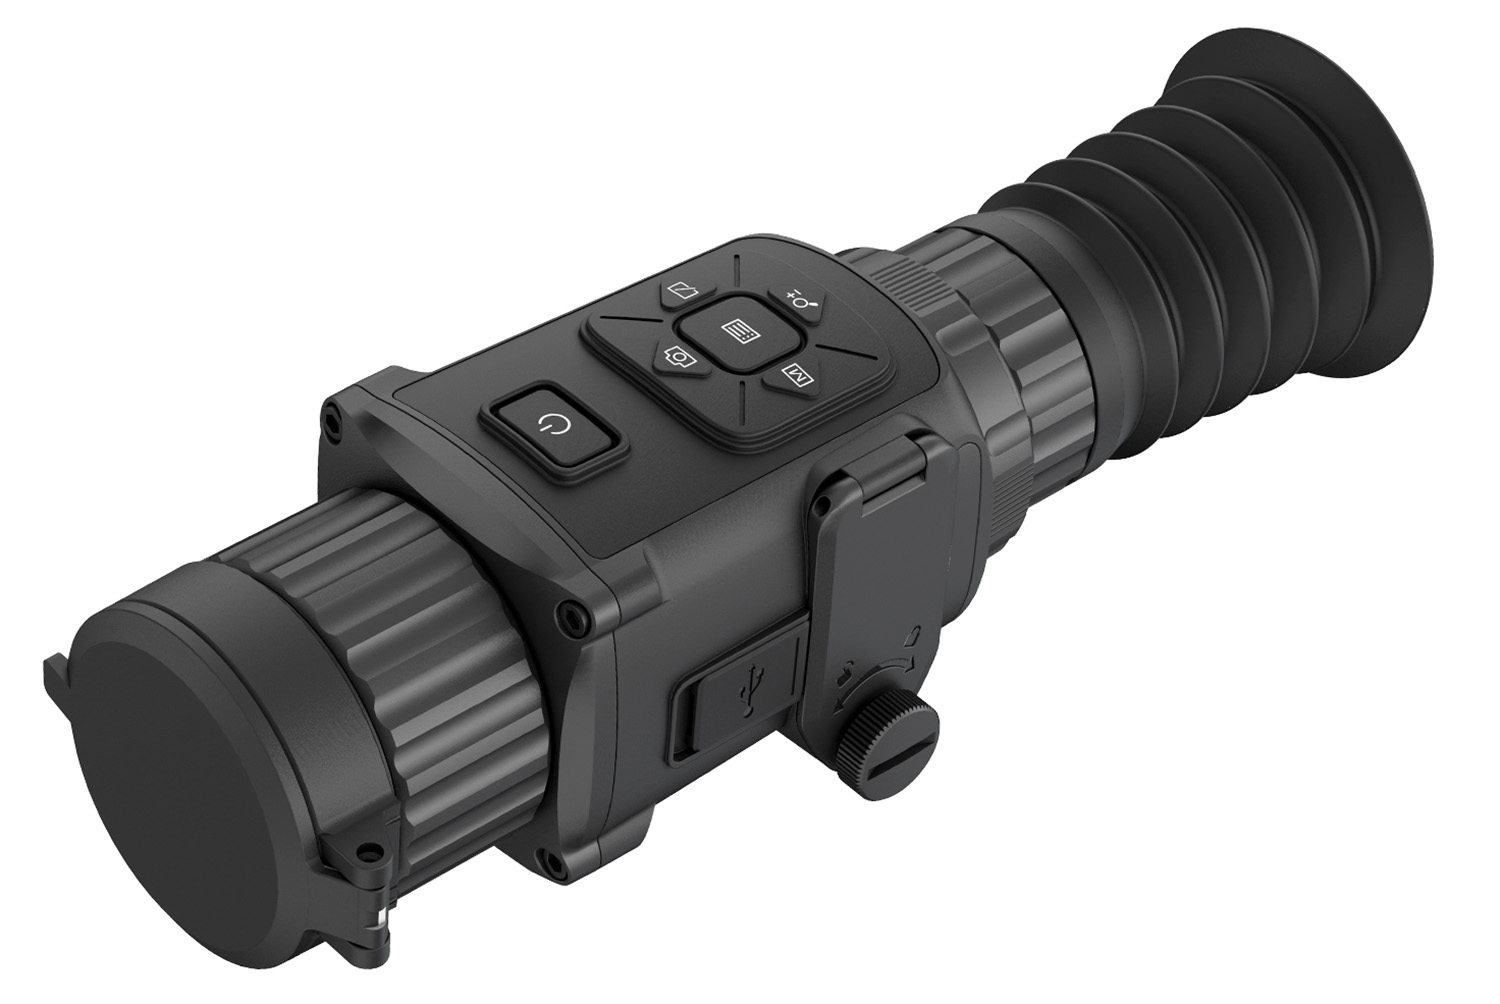 AGM Global Vision 3092455005TH31 Rattler TS35-384 Thermal Hand Held/Mountable Scope Matte Black 2.14x 35mm Red Crosshair 384x288 Resolution Digital 1x/2x/4x/8x/PIP Zoom